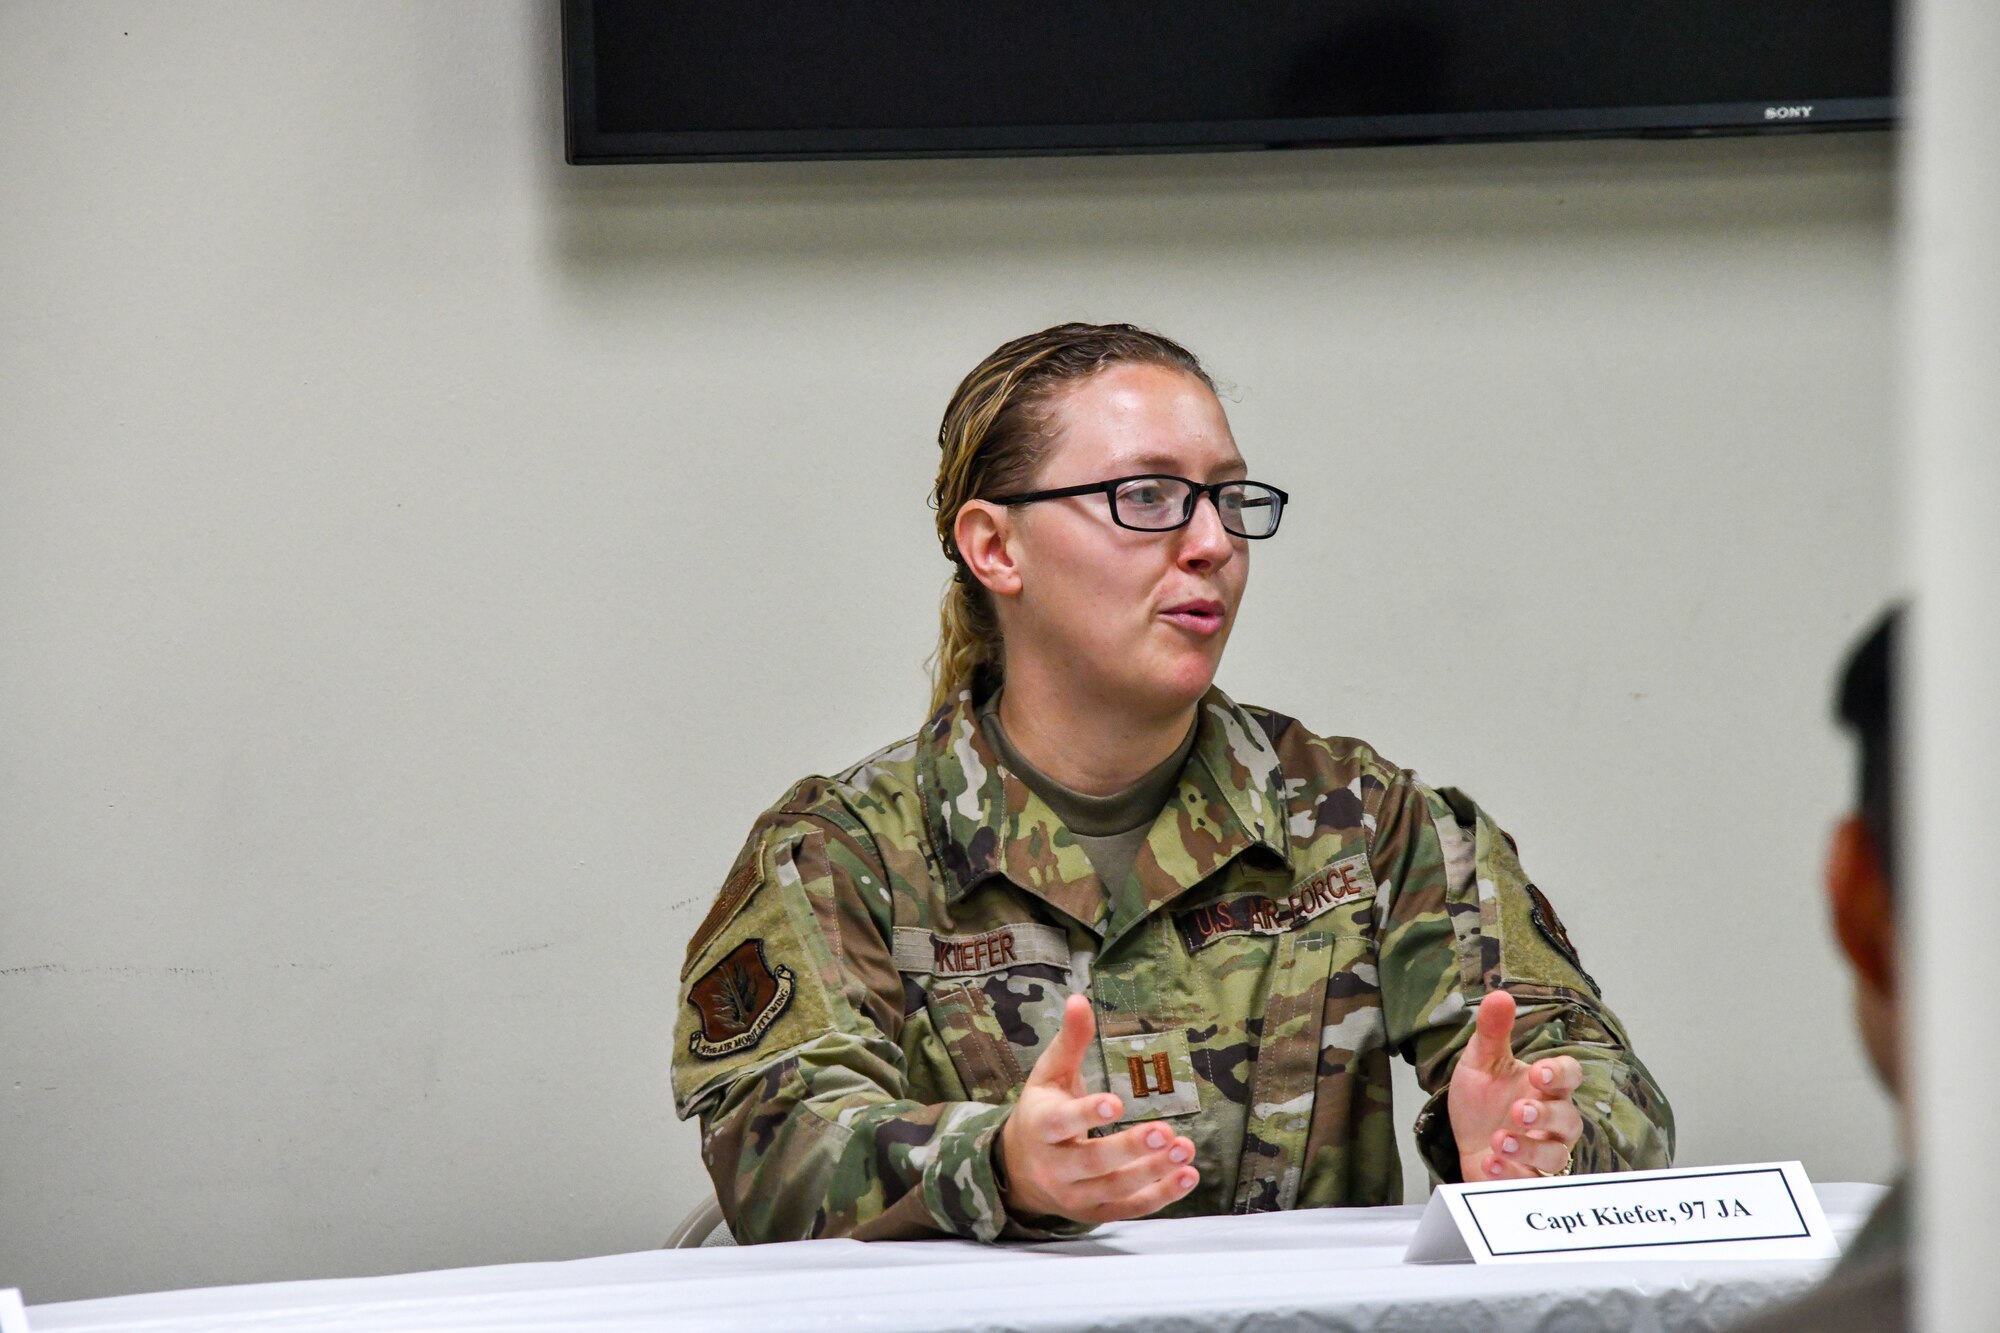 U.S. Air Force Captain Sarah Kiefer, 97th Air Mobility Wing assistant staff judge advocate, answers a question during an LGBTQ+ discussion panel at Altus Air Force Base, Oklahoma, June 10, 2022. The panel consisted of members from different squadrons across the base to offer different perspectives. (U.S. Air Force photo by Airman 1st Class Miyah Gray)